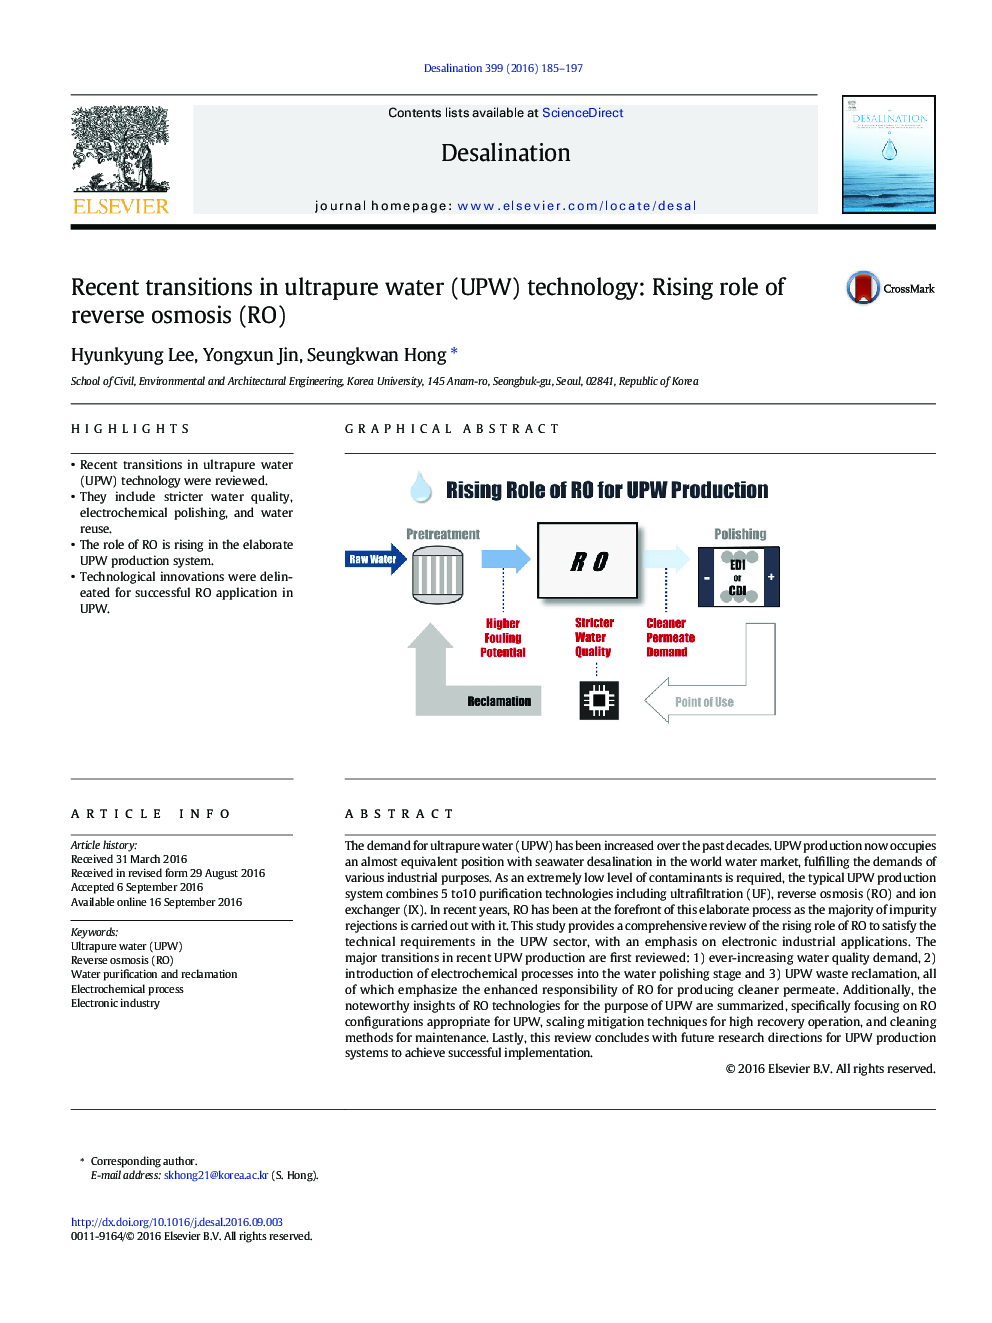 Recent transitions in ultrapure water (UPW) technology: Rising role of reverse osmosis (RO)